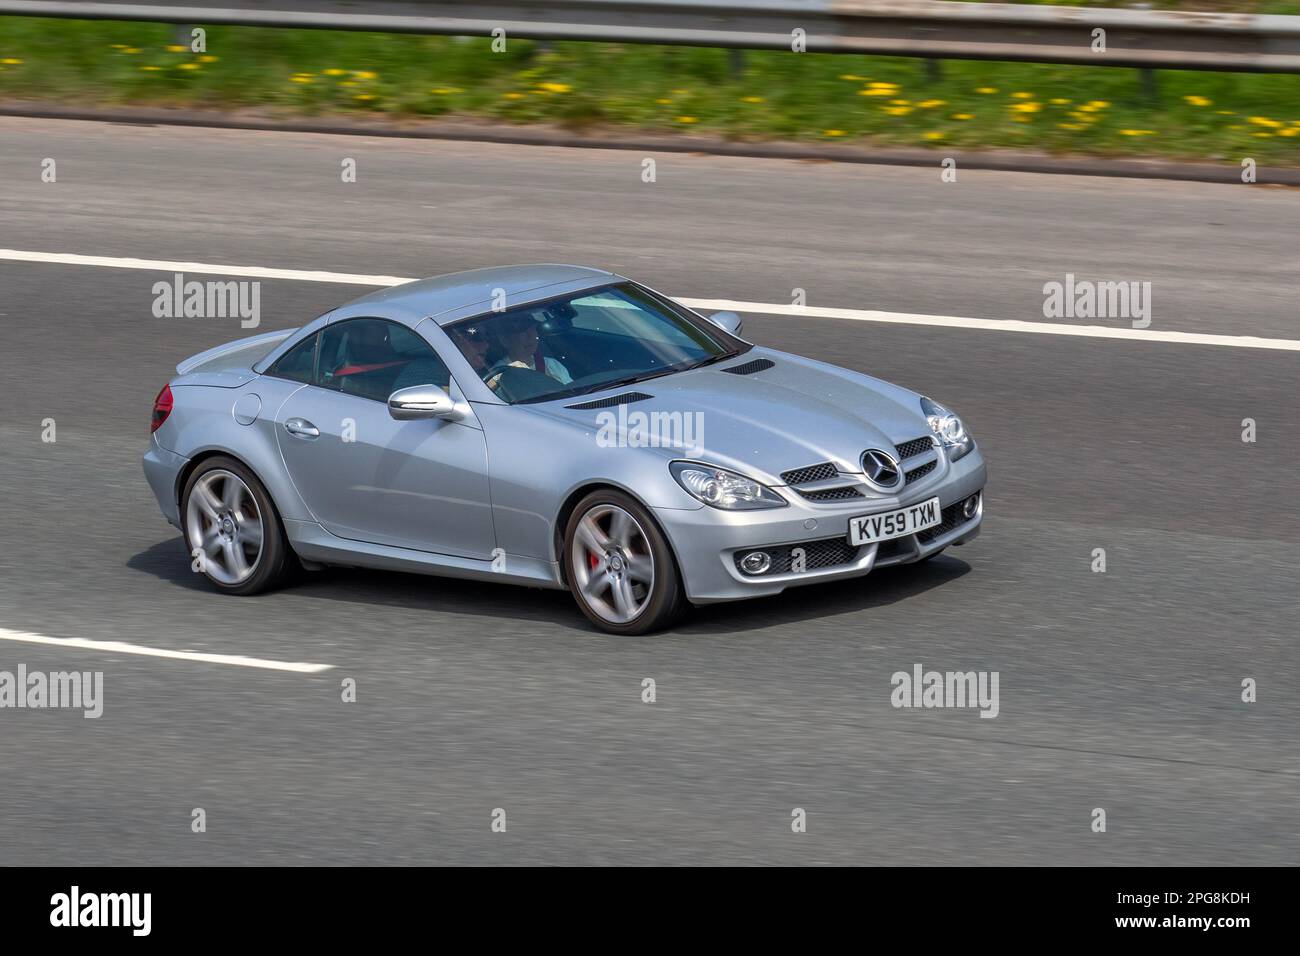 2009 (59) Silver MERCEDES BENZ SLK 200 KOMPRESSOR 2LOOK EDITION 1796cc Petrol 5 speed automatic; travelling on the M6 motorway, UK Stock Photo